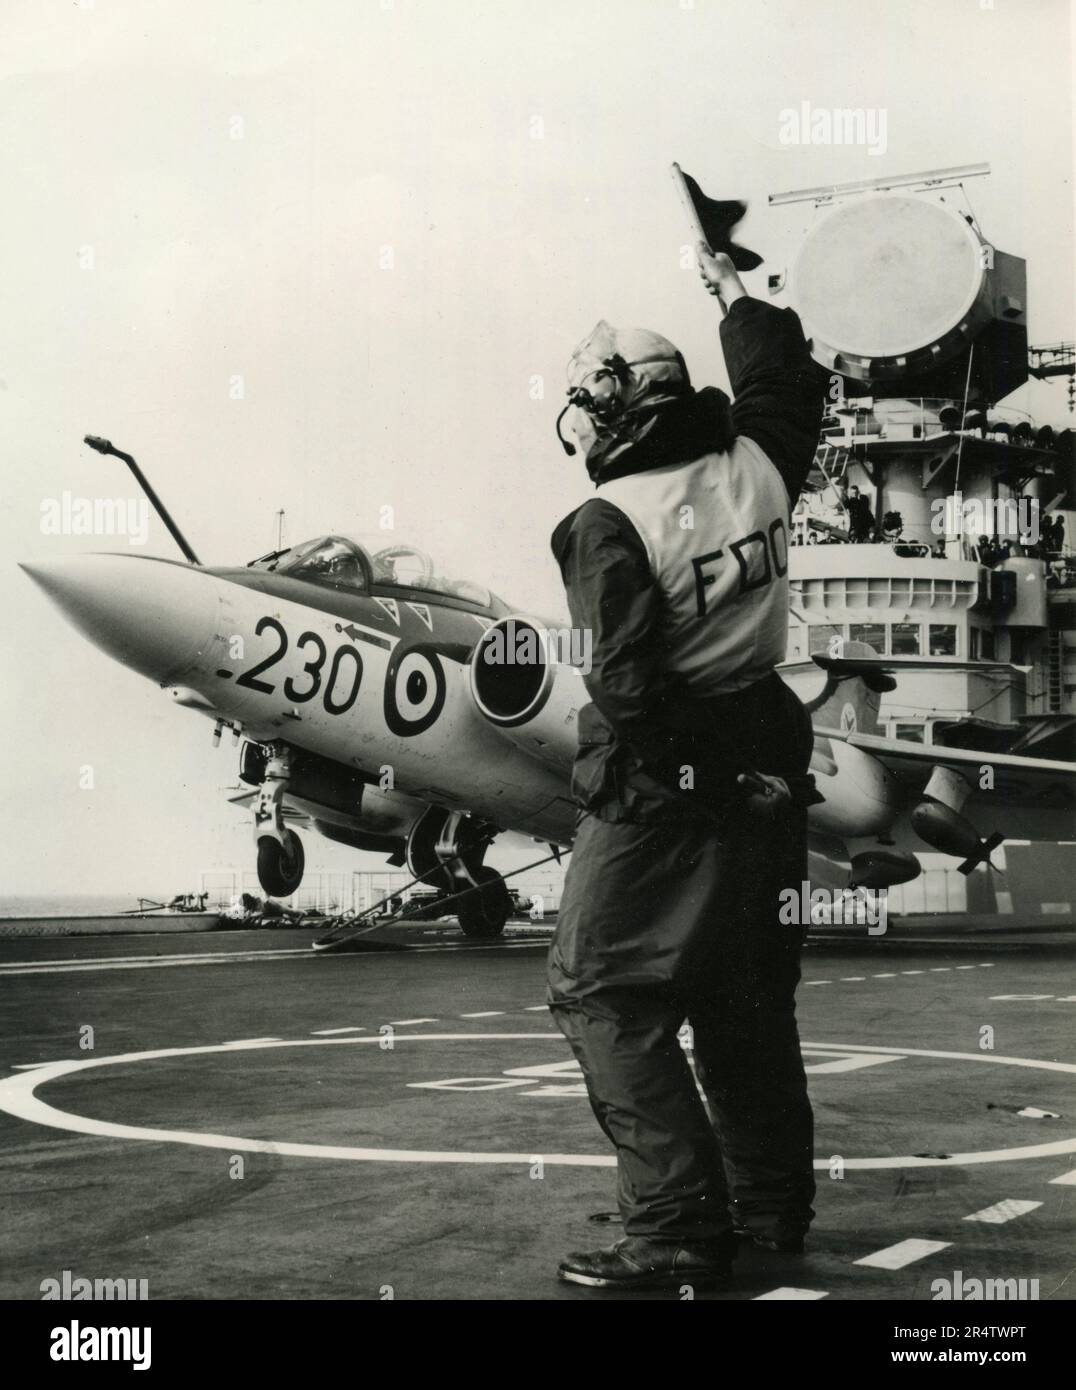 A Hawker Siddeley Buccaneer S. Mk. 2 takes off from Royal Navy HMS Victorious, UK 1966 Stock Photo